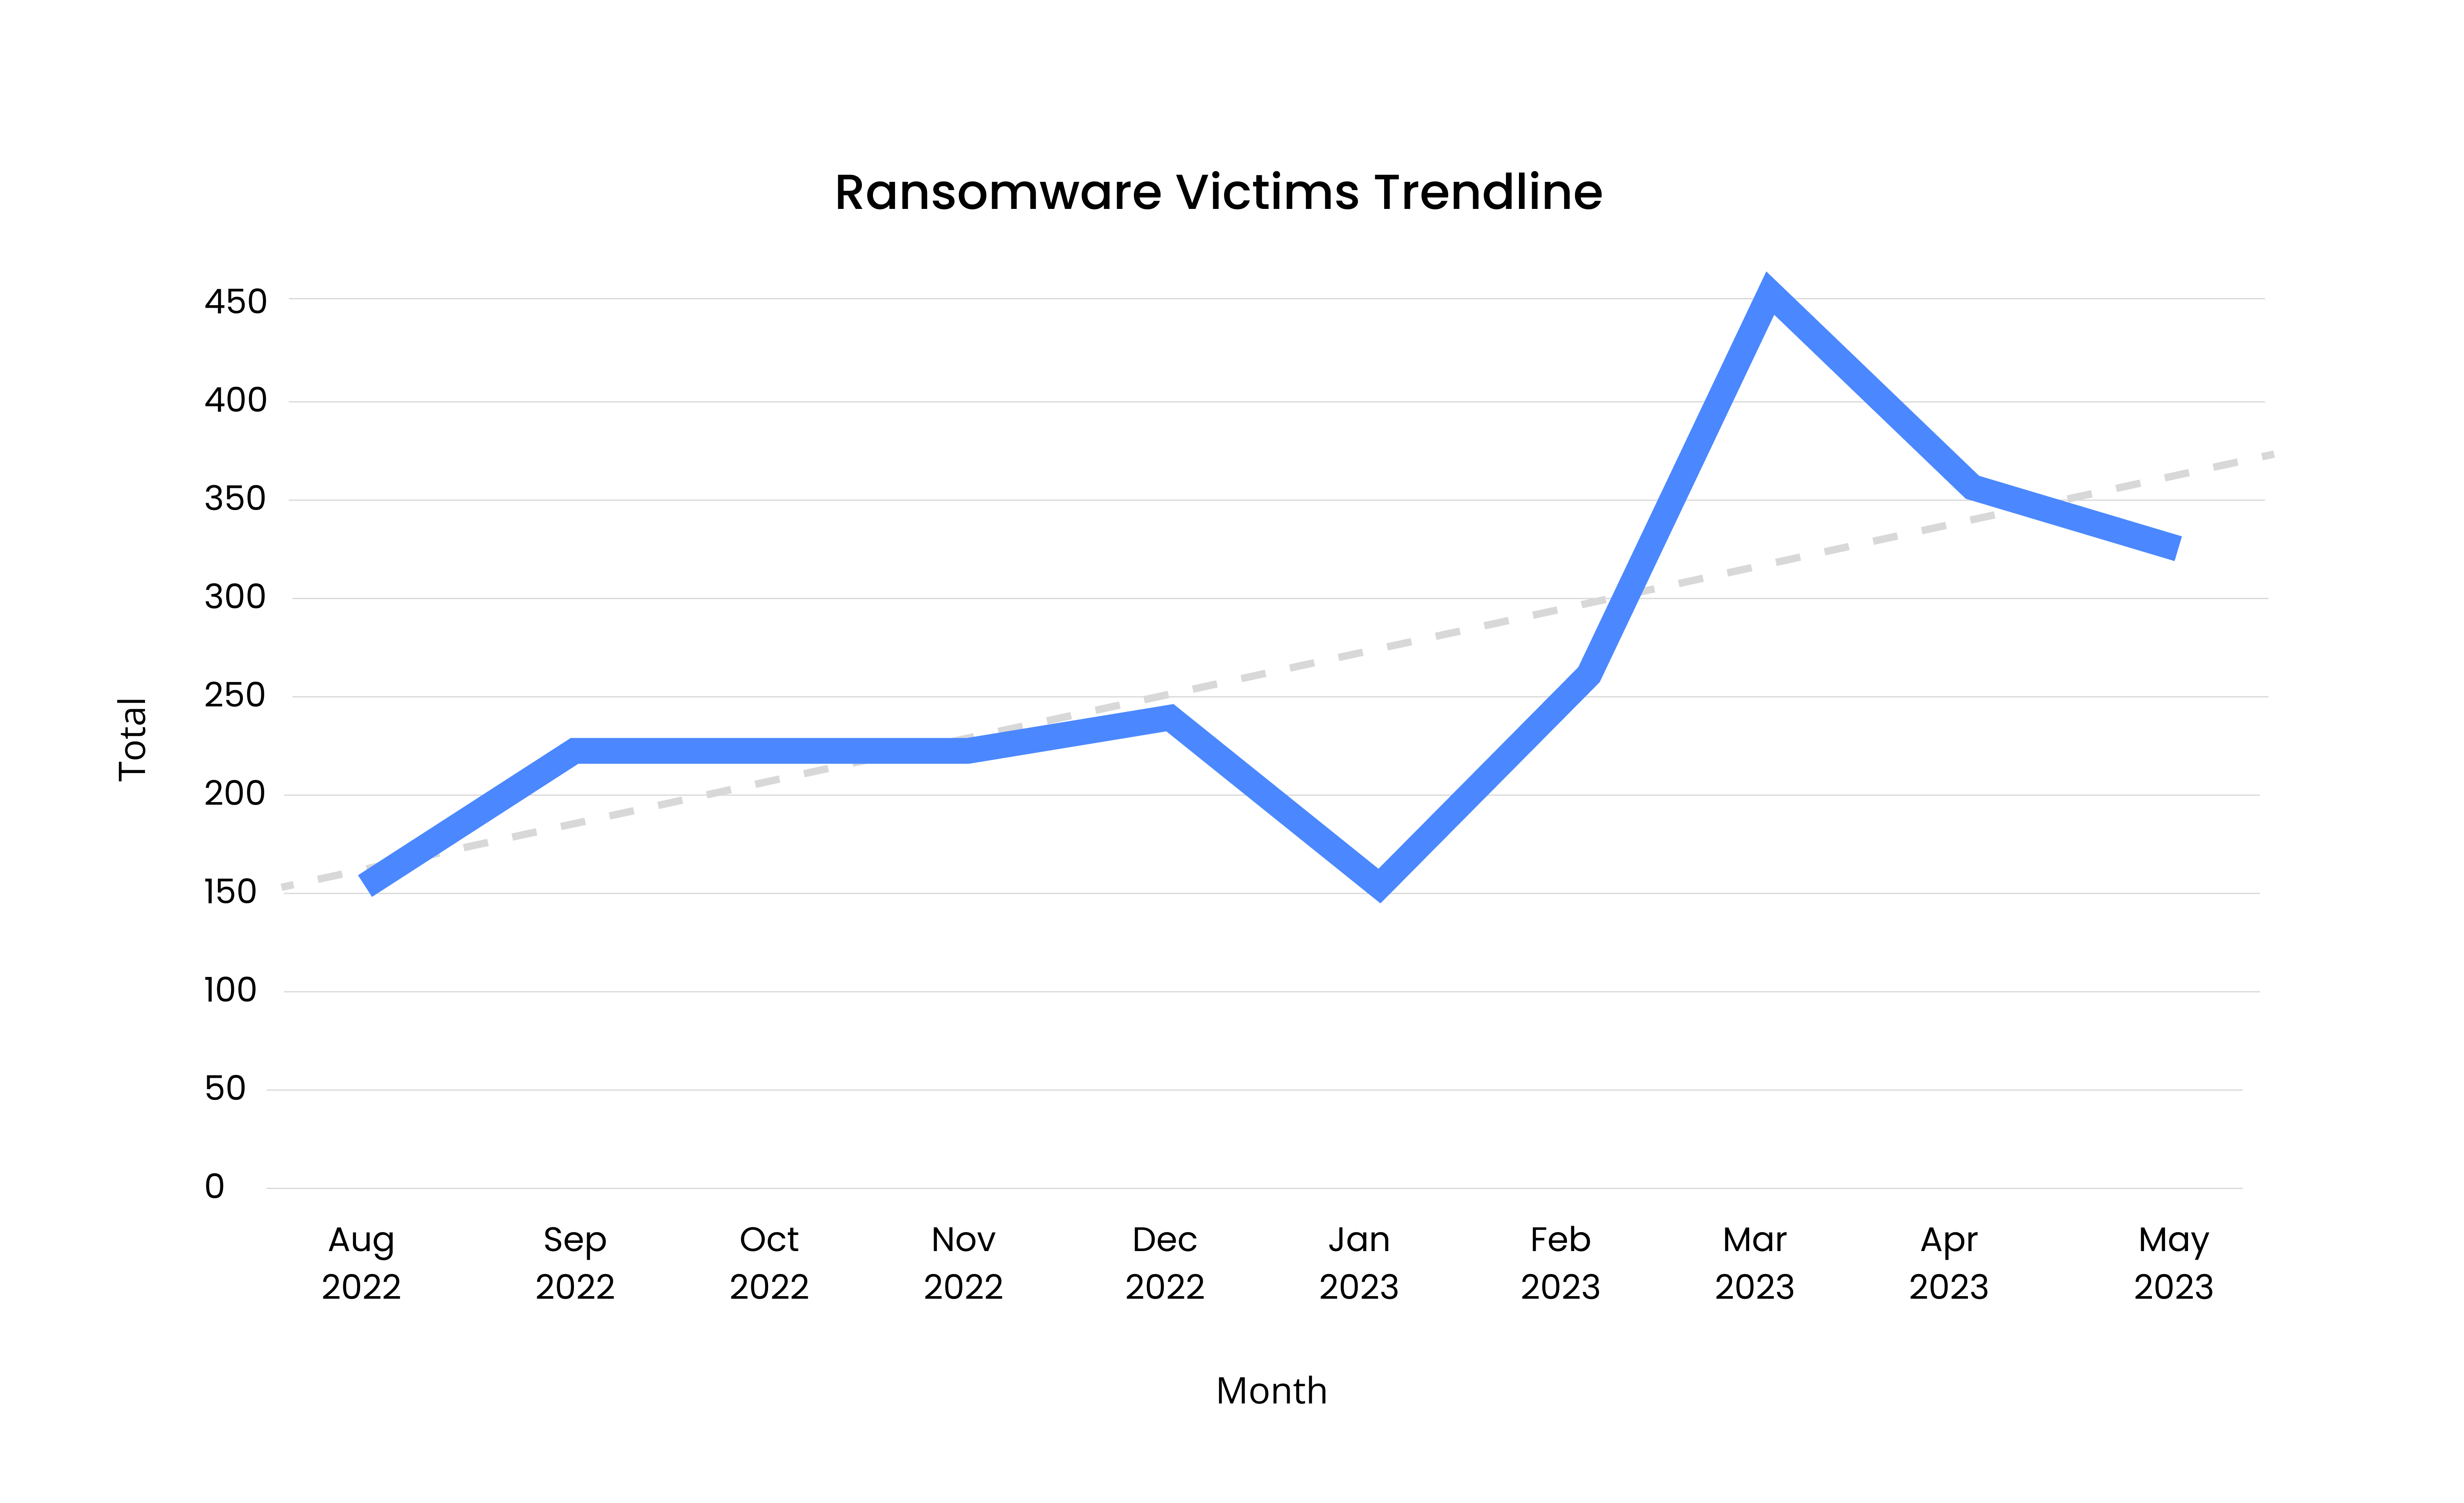 [LINE GRAPH] Ransomware Victims Trendline from August 2022 - May 2023